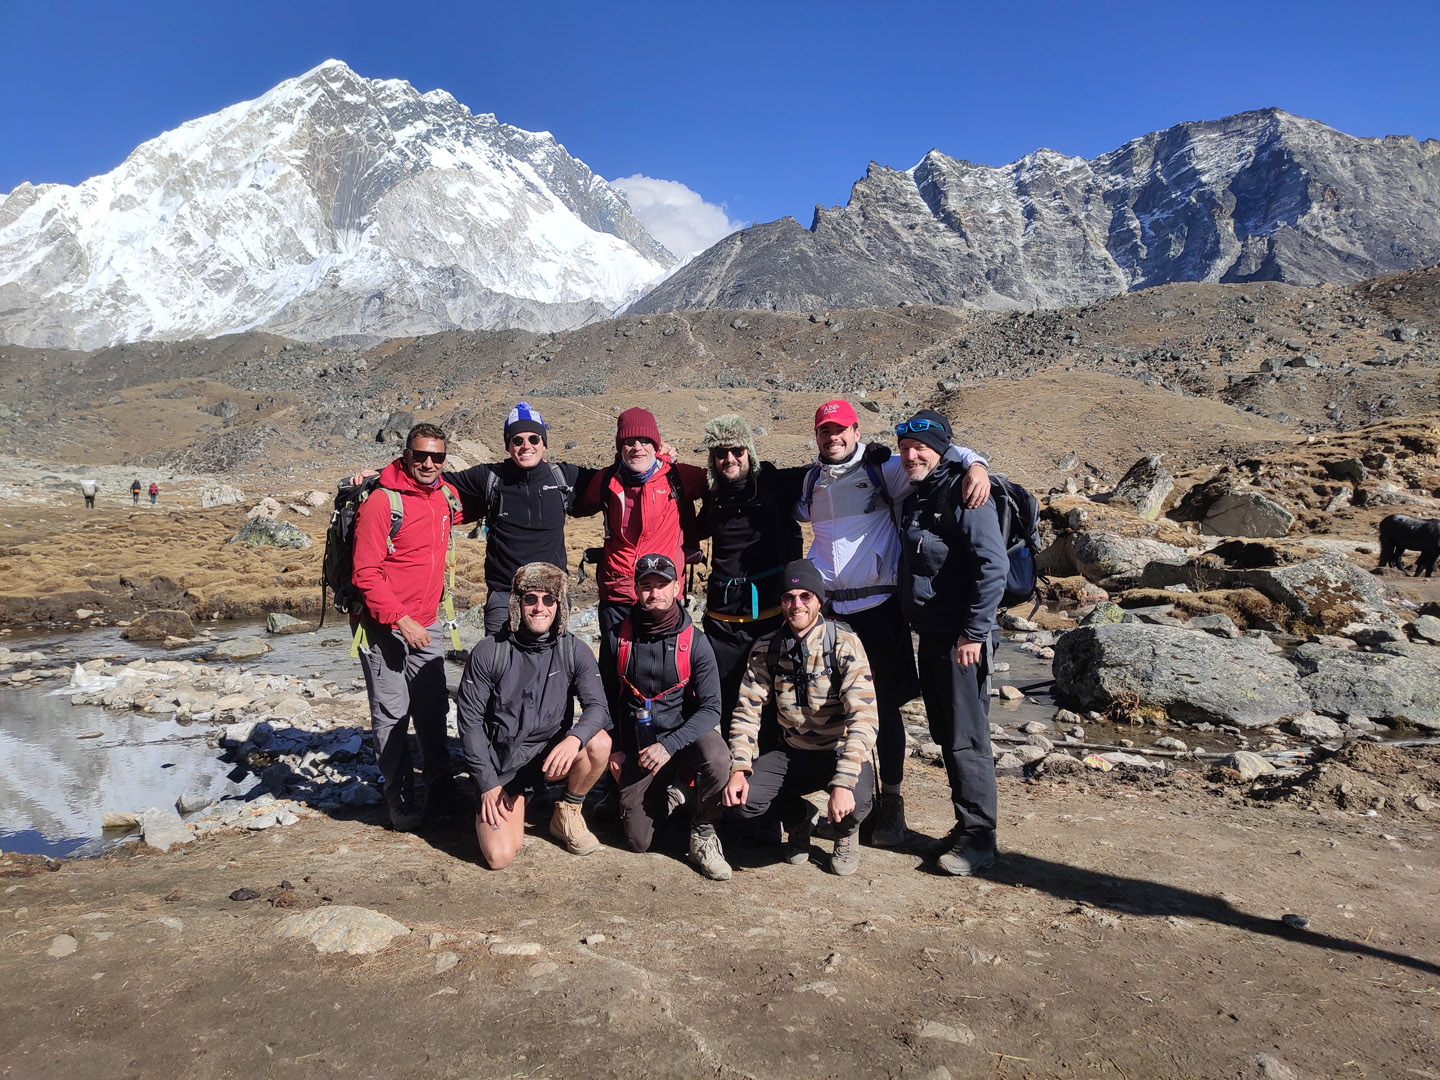 Trekkers posing at Lobuche with Mount Nutpse in the background